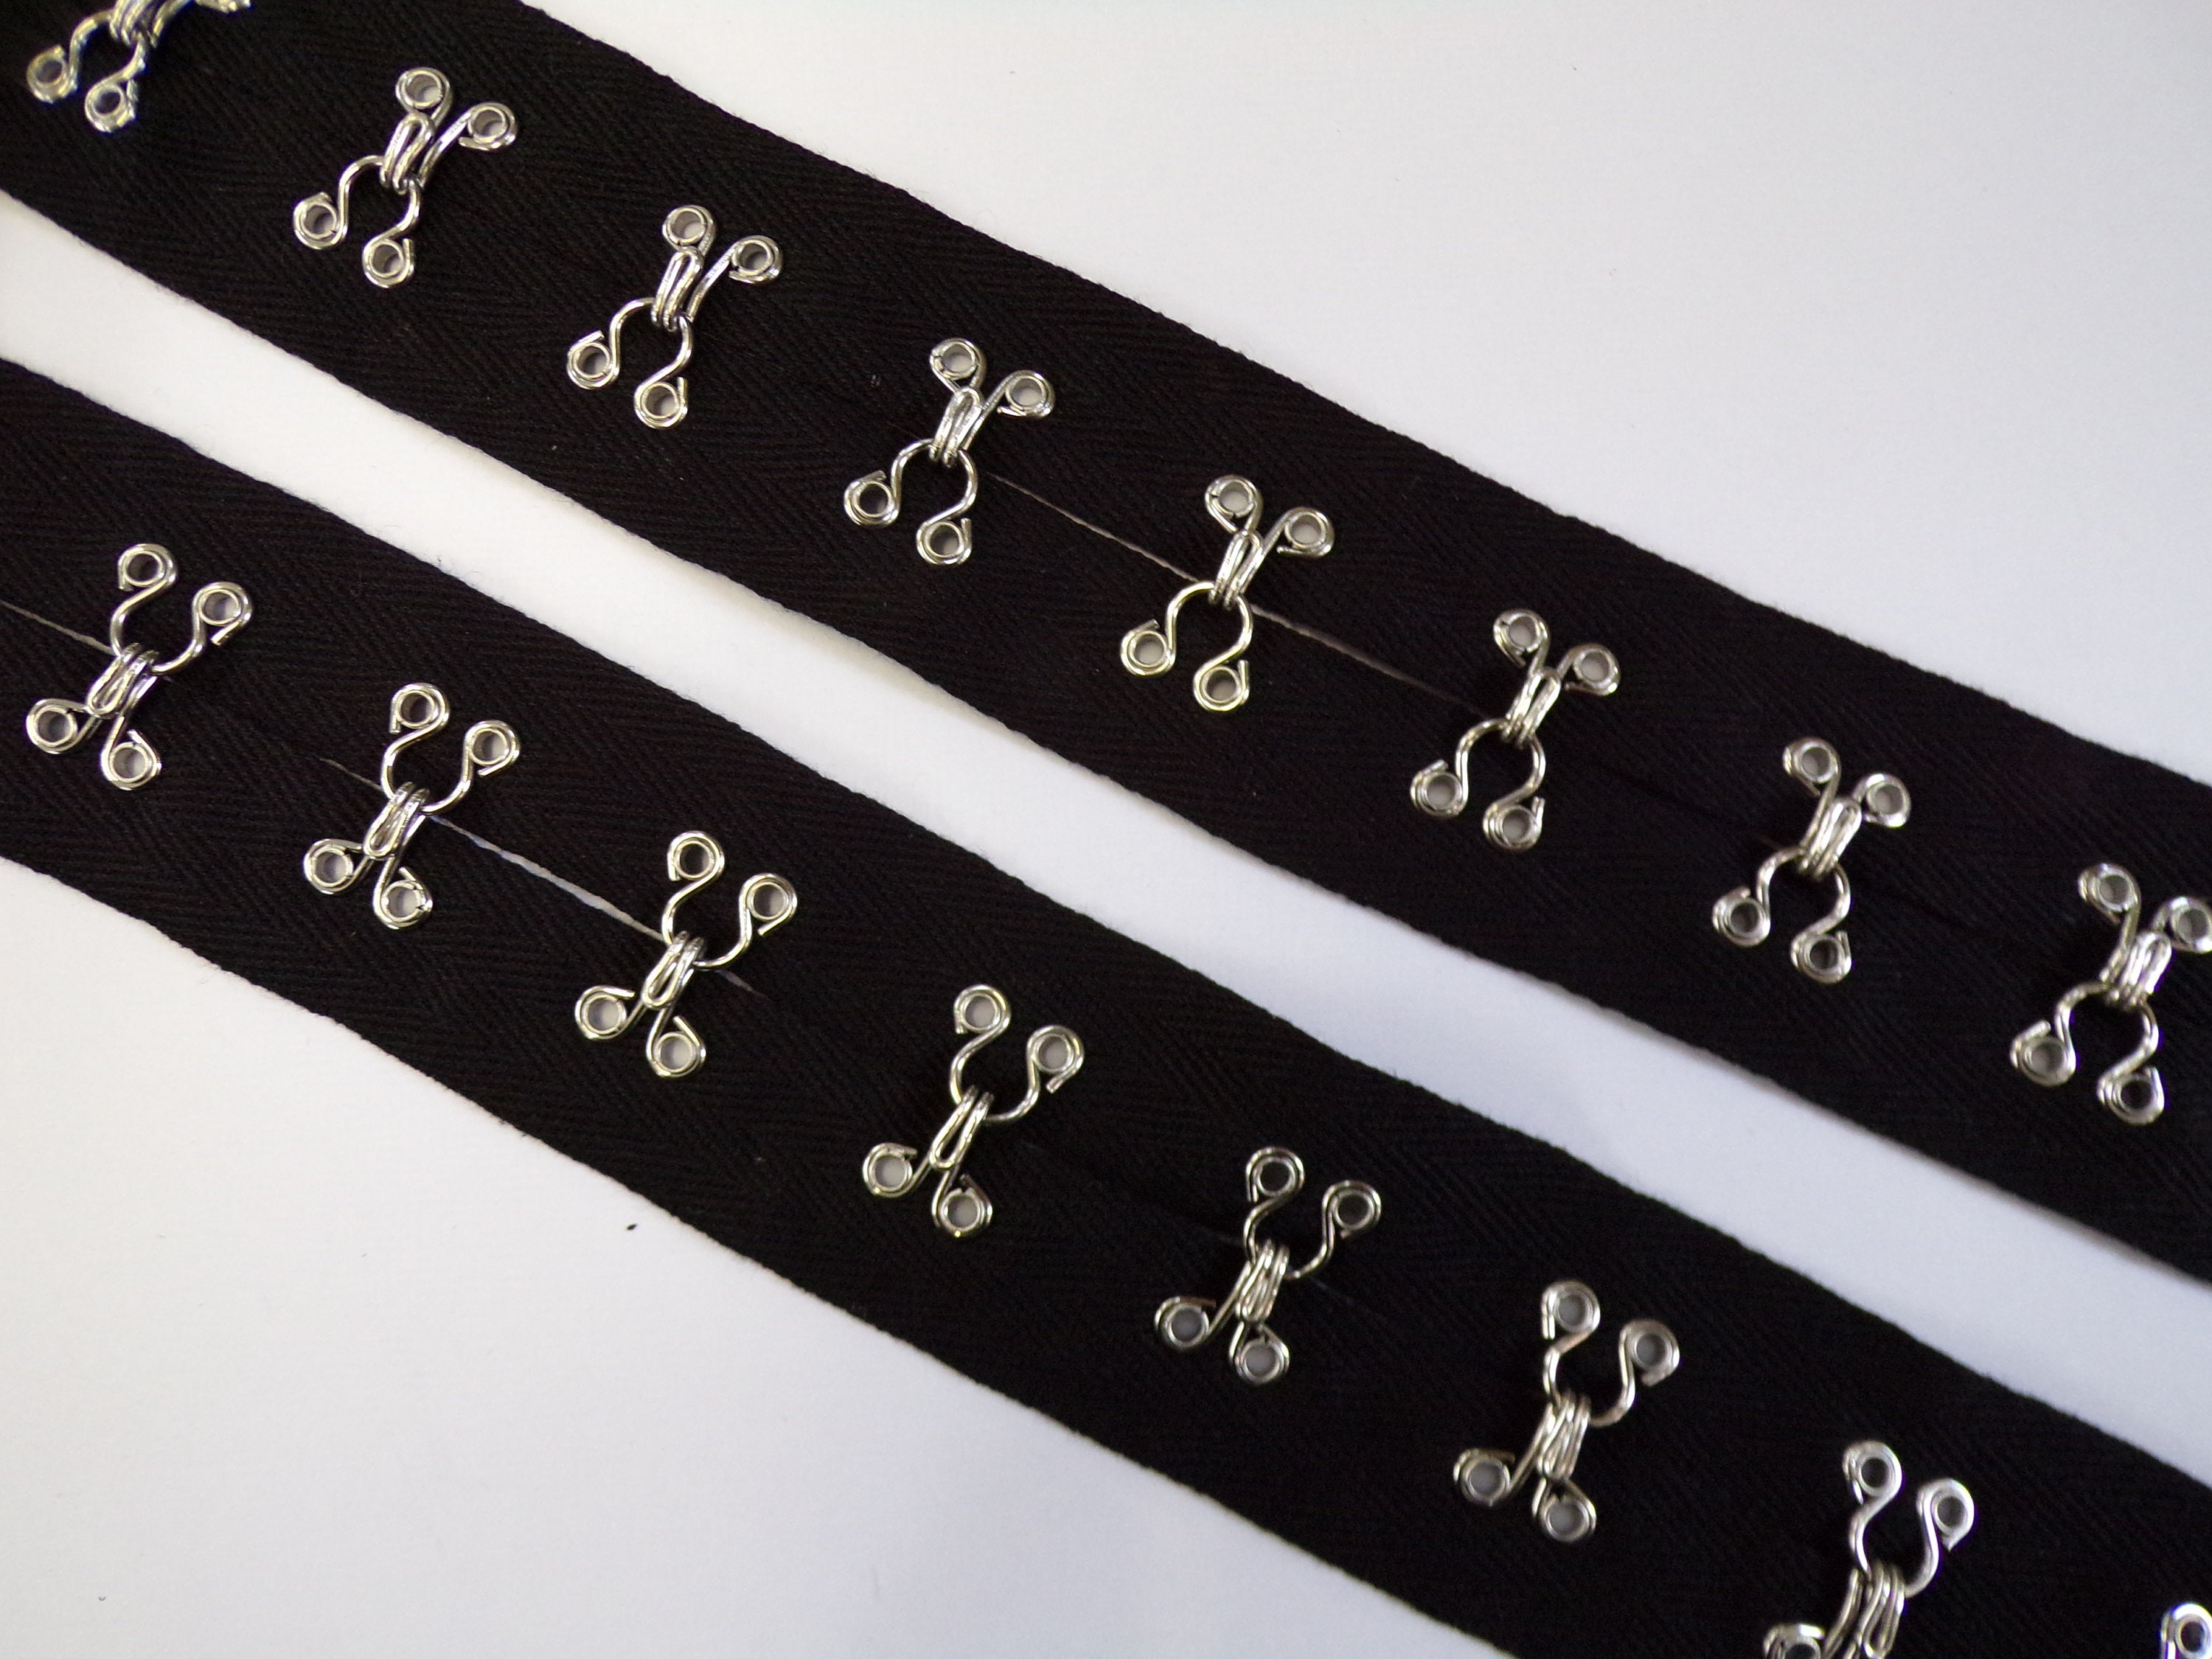 20mm, Hook and Eye Tape Cotton Twill, Black or Ivory, Chunky Hook and Eye  Tape, Corset Tape, Lingerie Tape, Quality Approved. Hooks and Eyes 